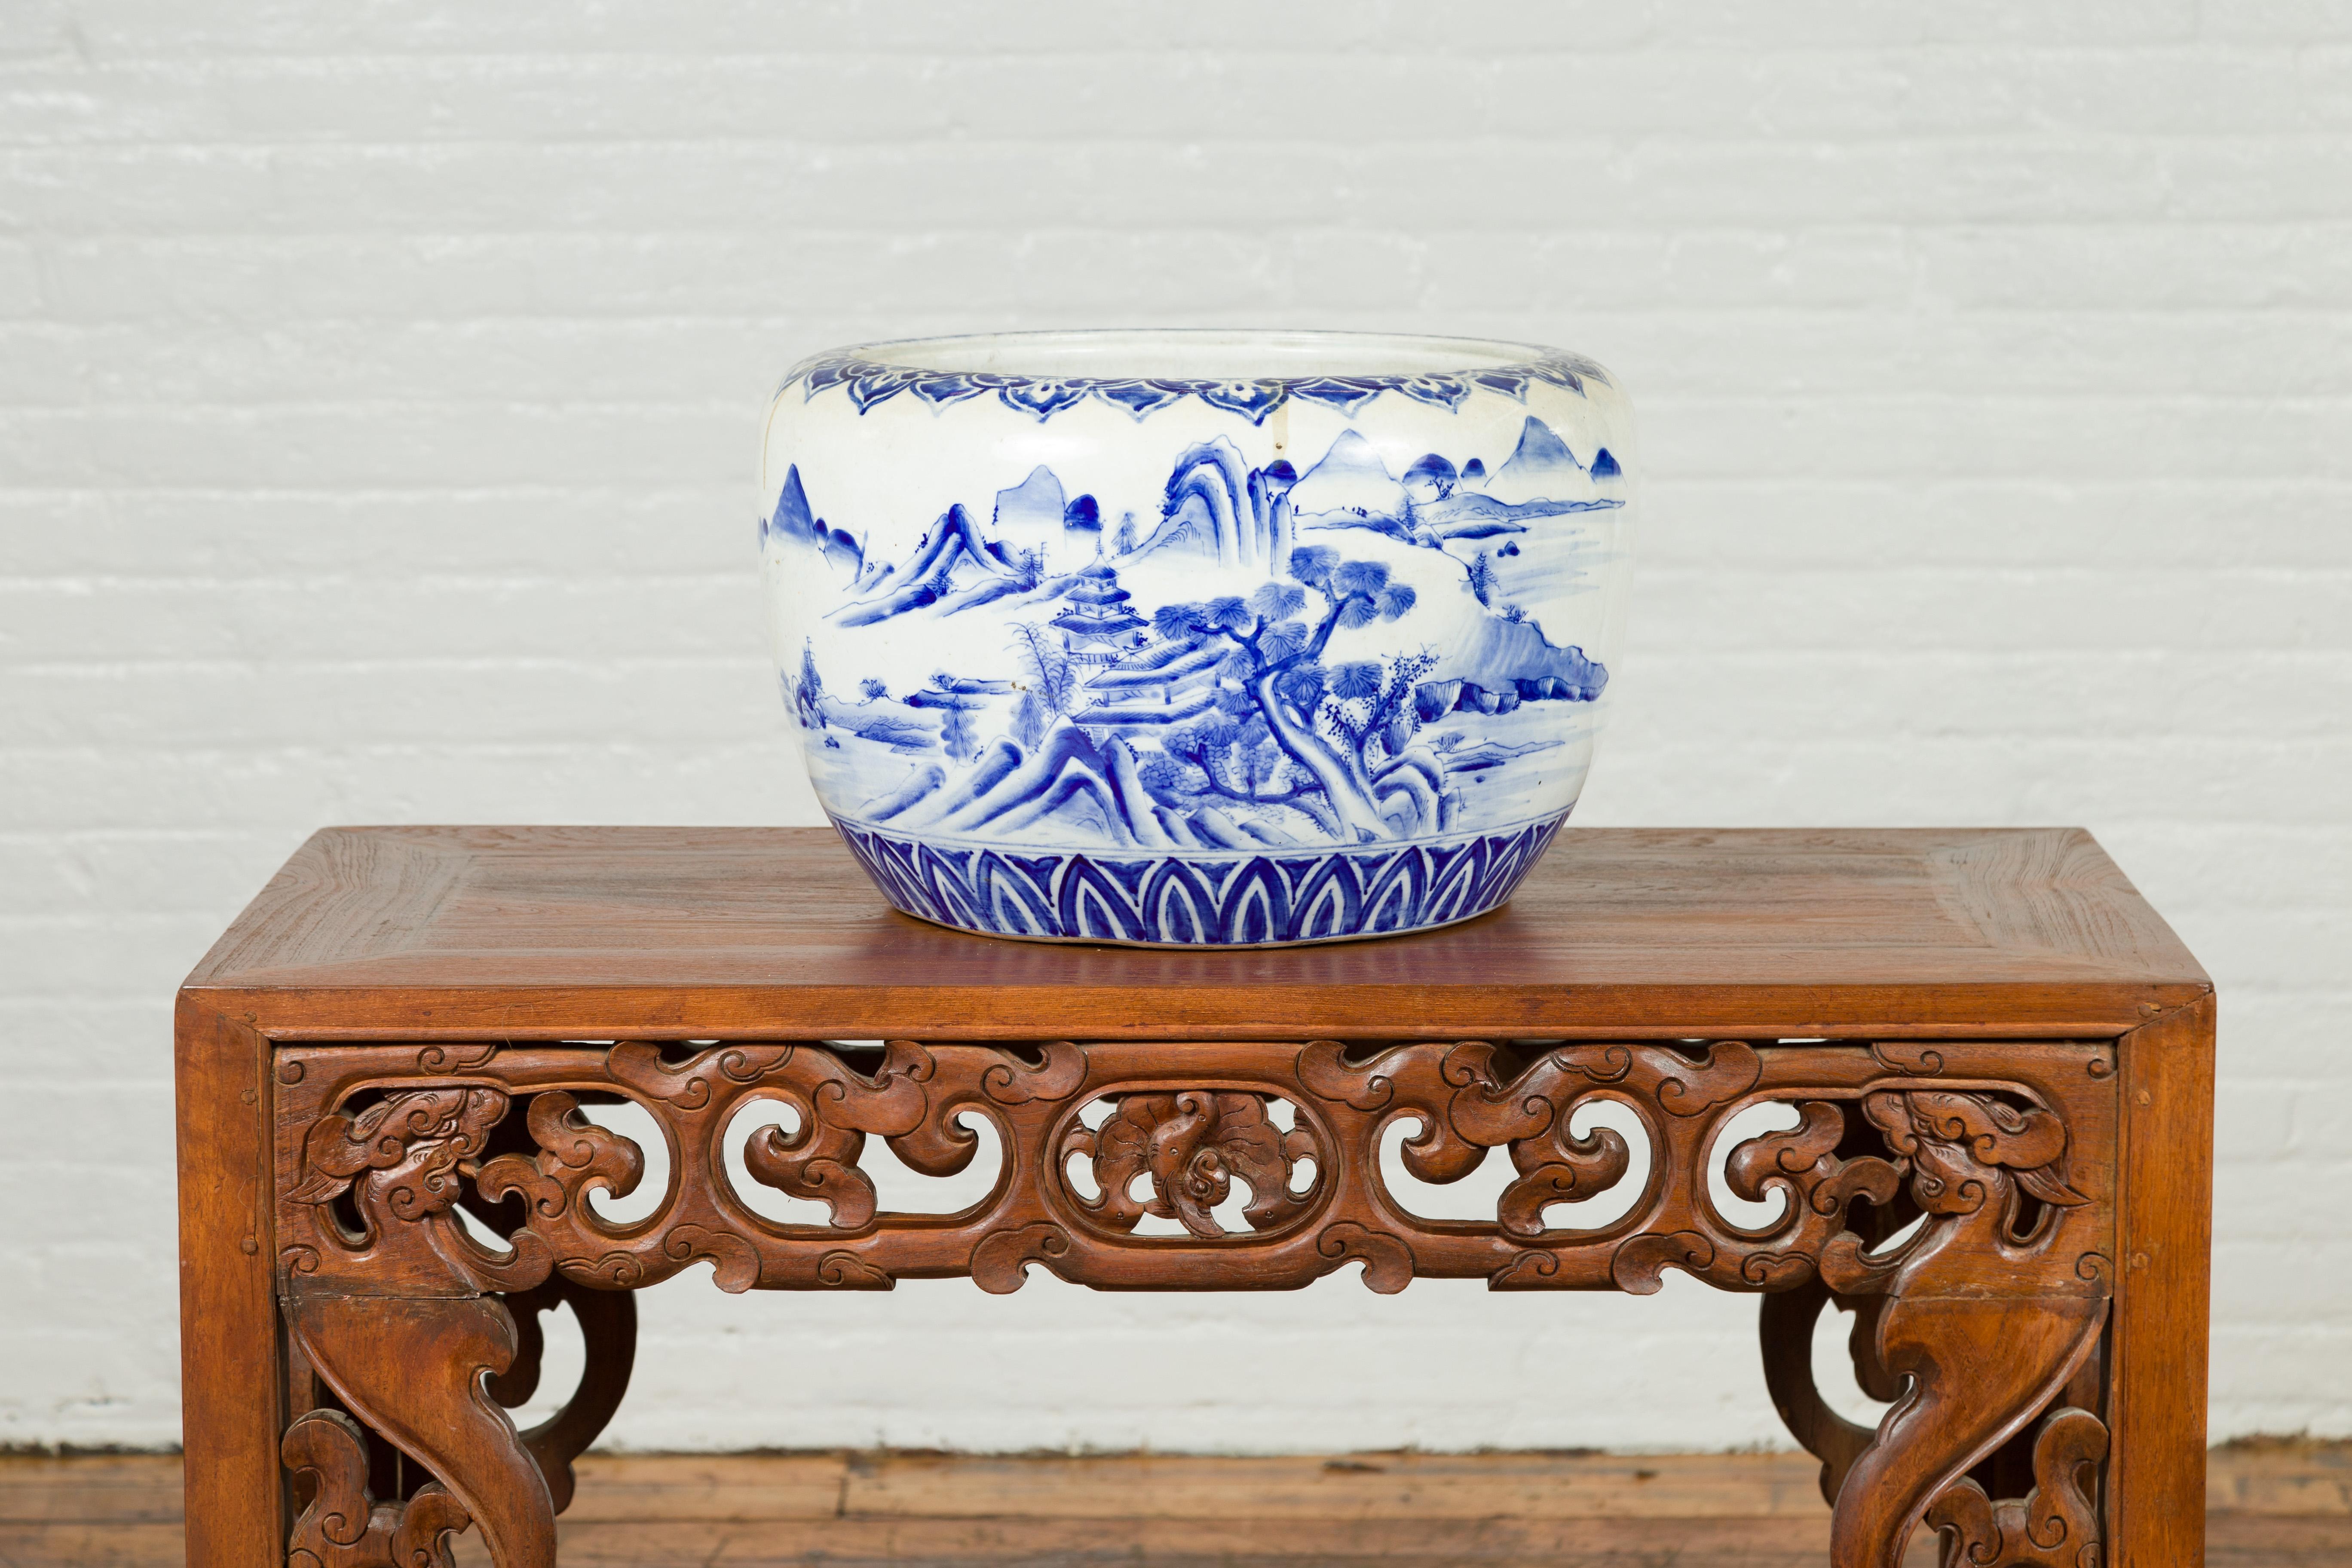 A Japanese Meiji period blue and white porcelain planter from the 19th century, with landscape scenes. Created in Japan during the Meiji period, this circular planter features a blue and white decor depicting exquisite landscape scenes with